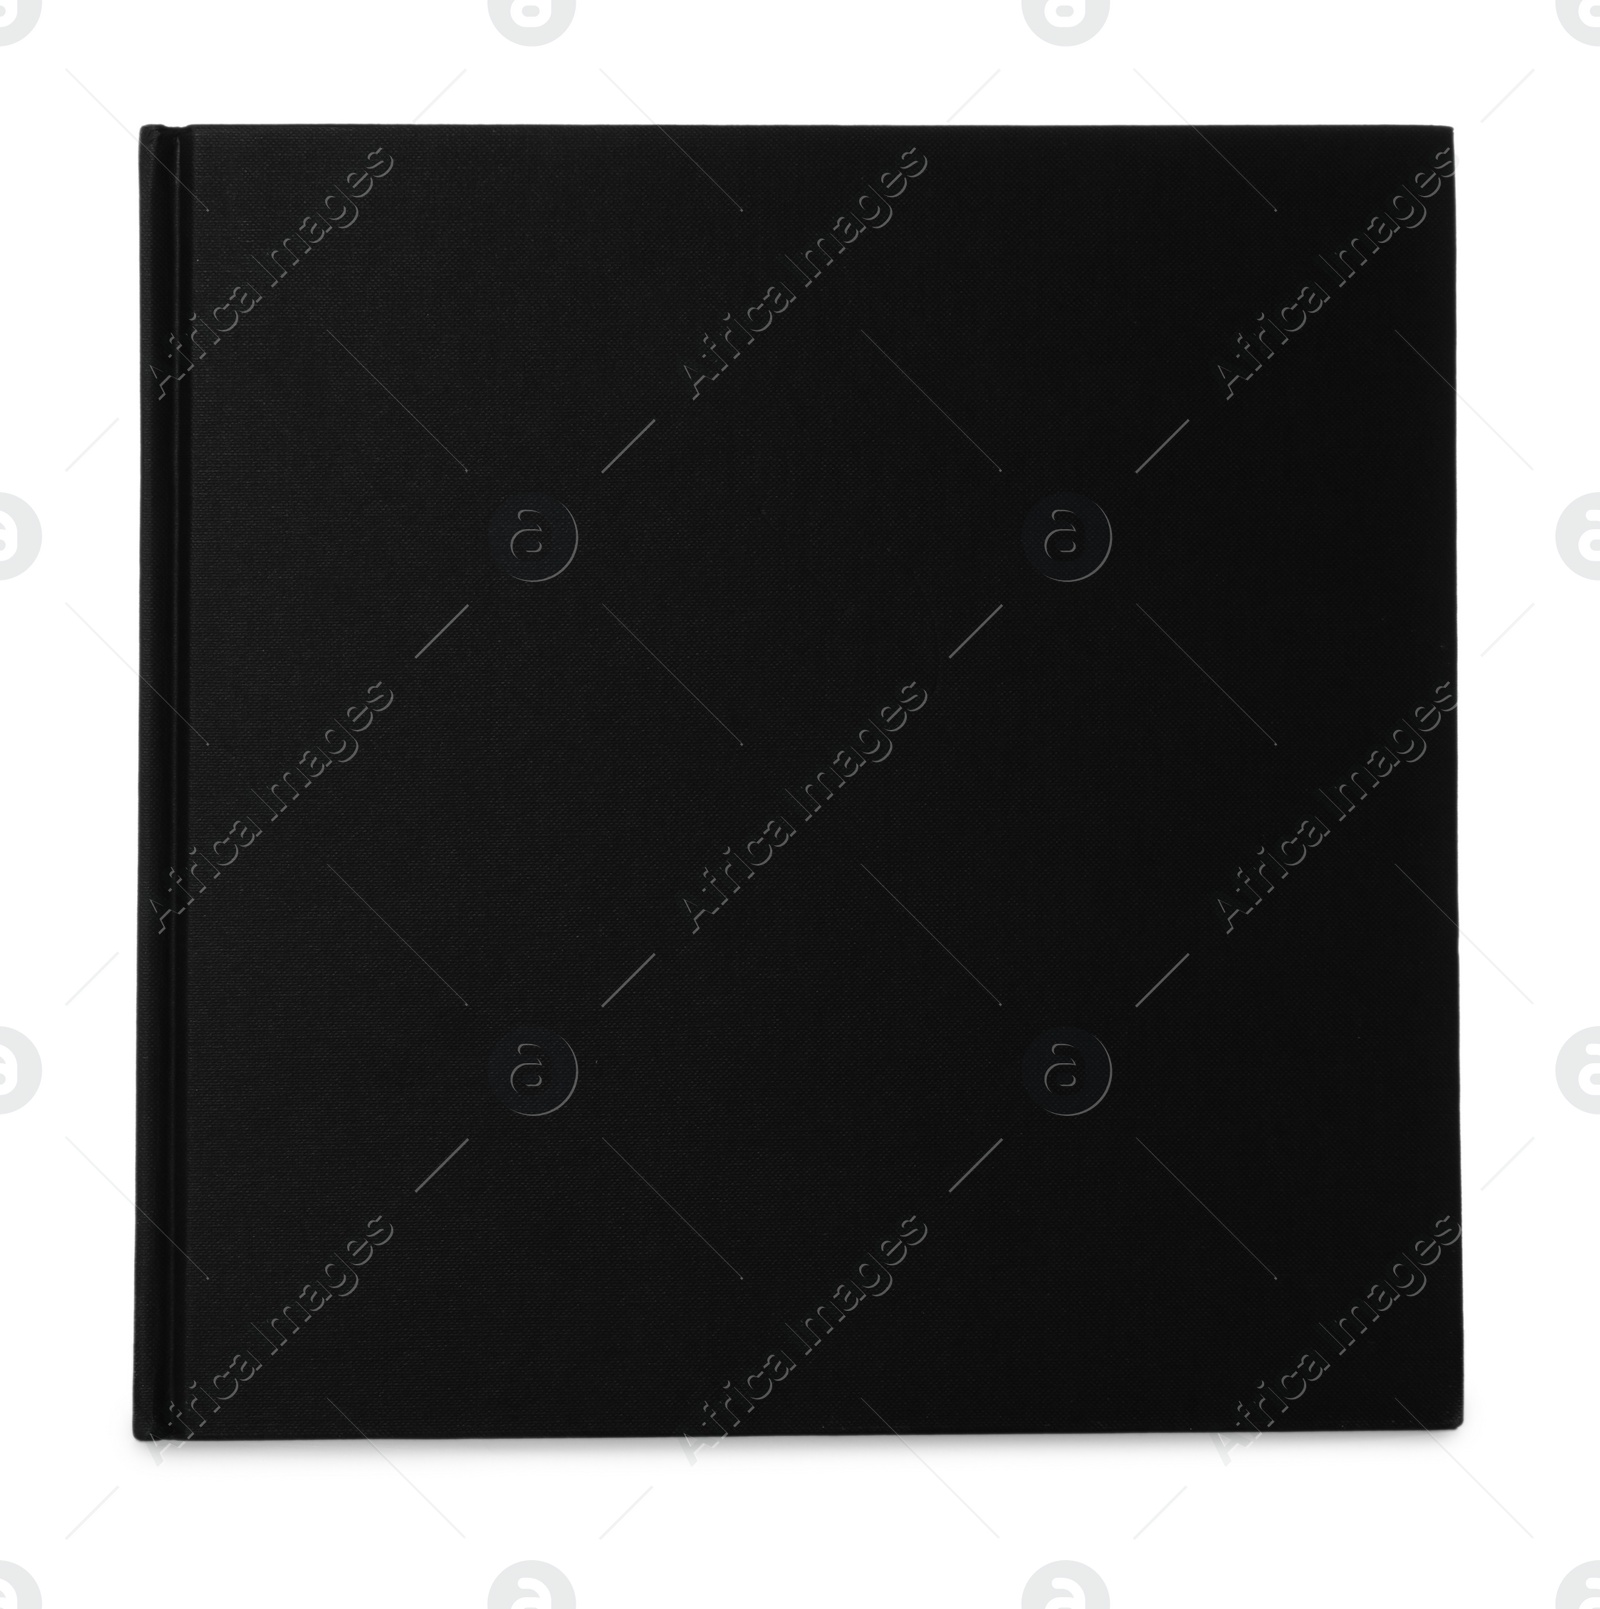 Photo of Closed book with black hard cover isolated on white